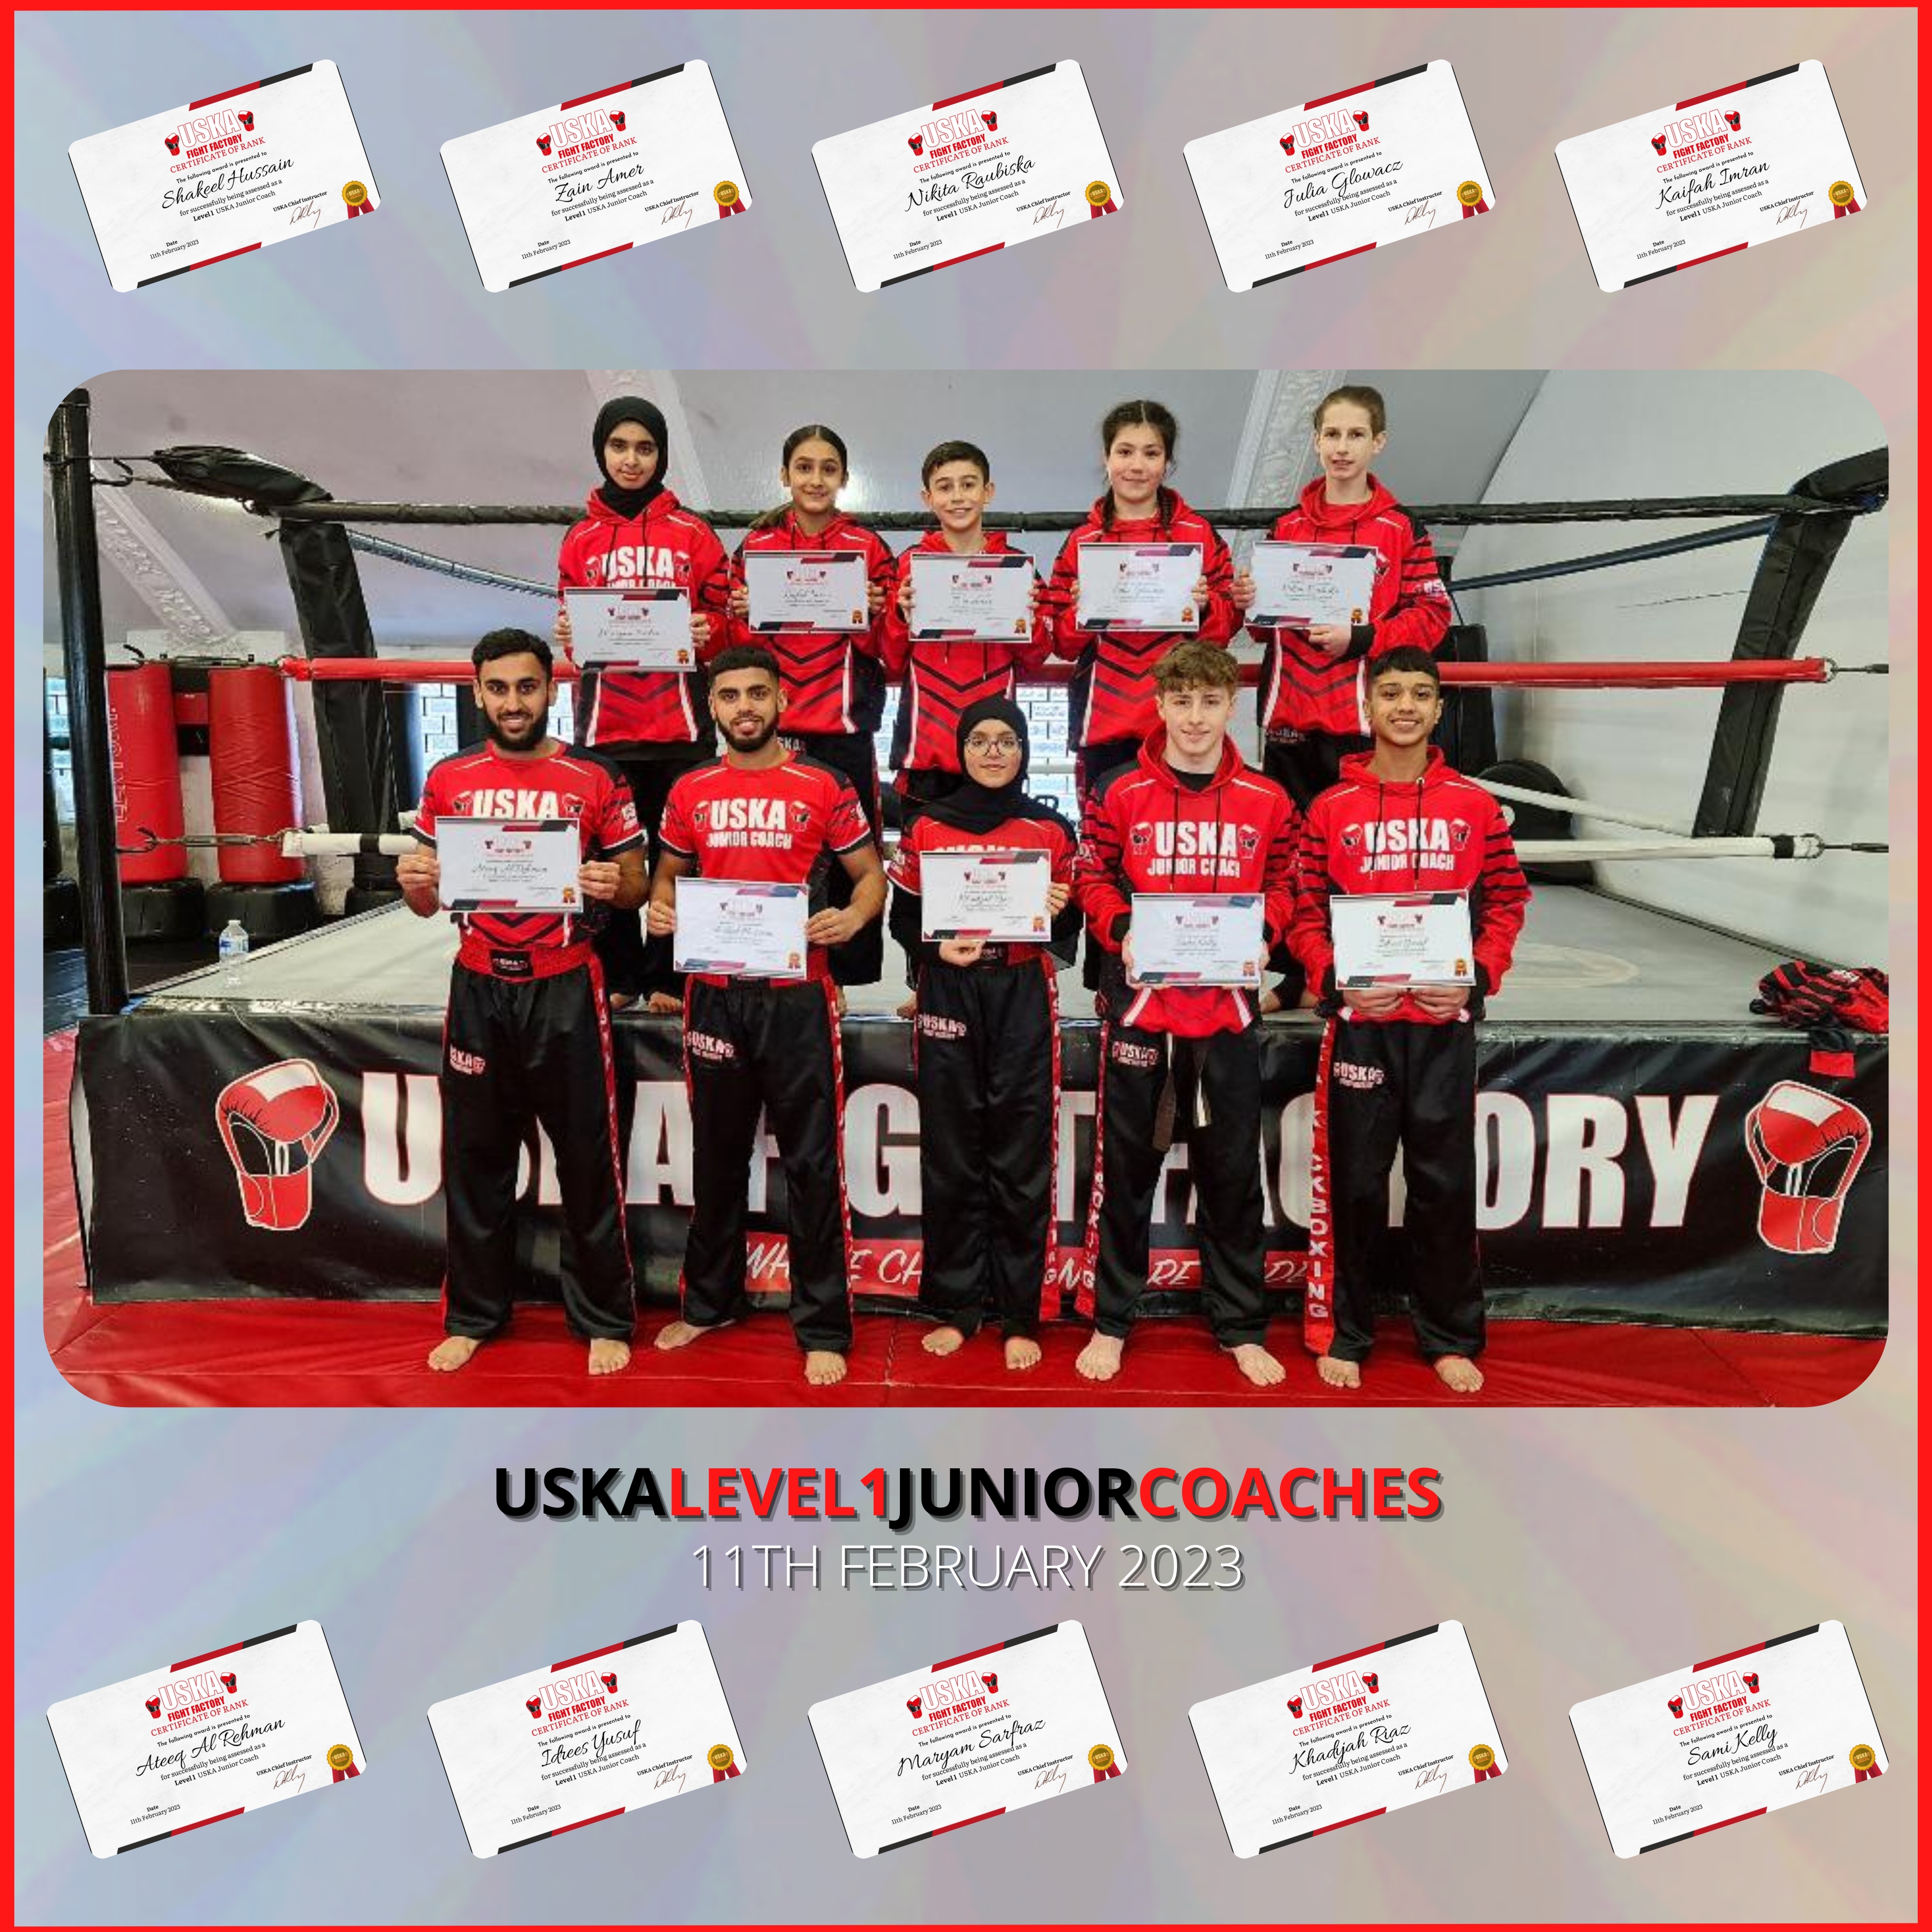 12-02-23 - Congratulations to our 10 Newly Qualified Level 1 USKA Junior Coaches